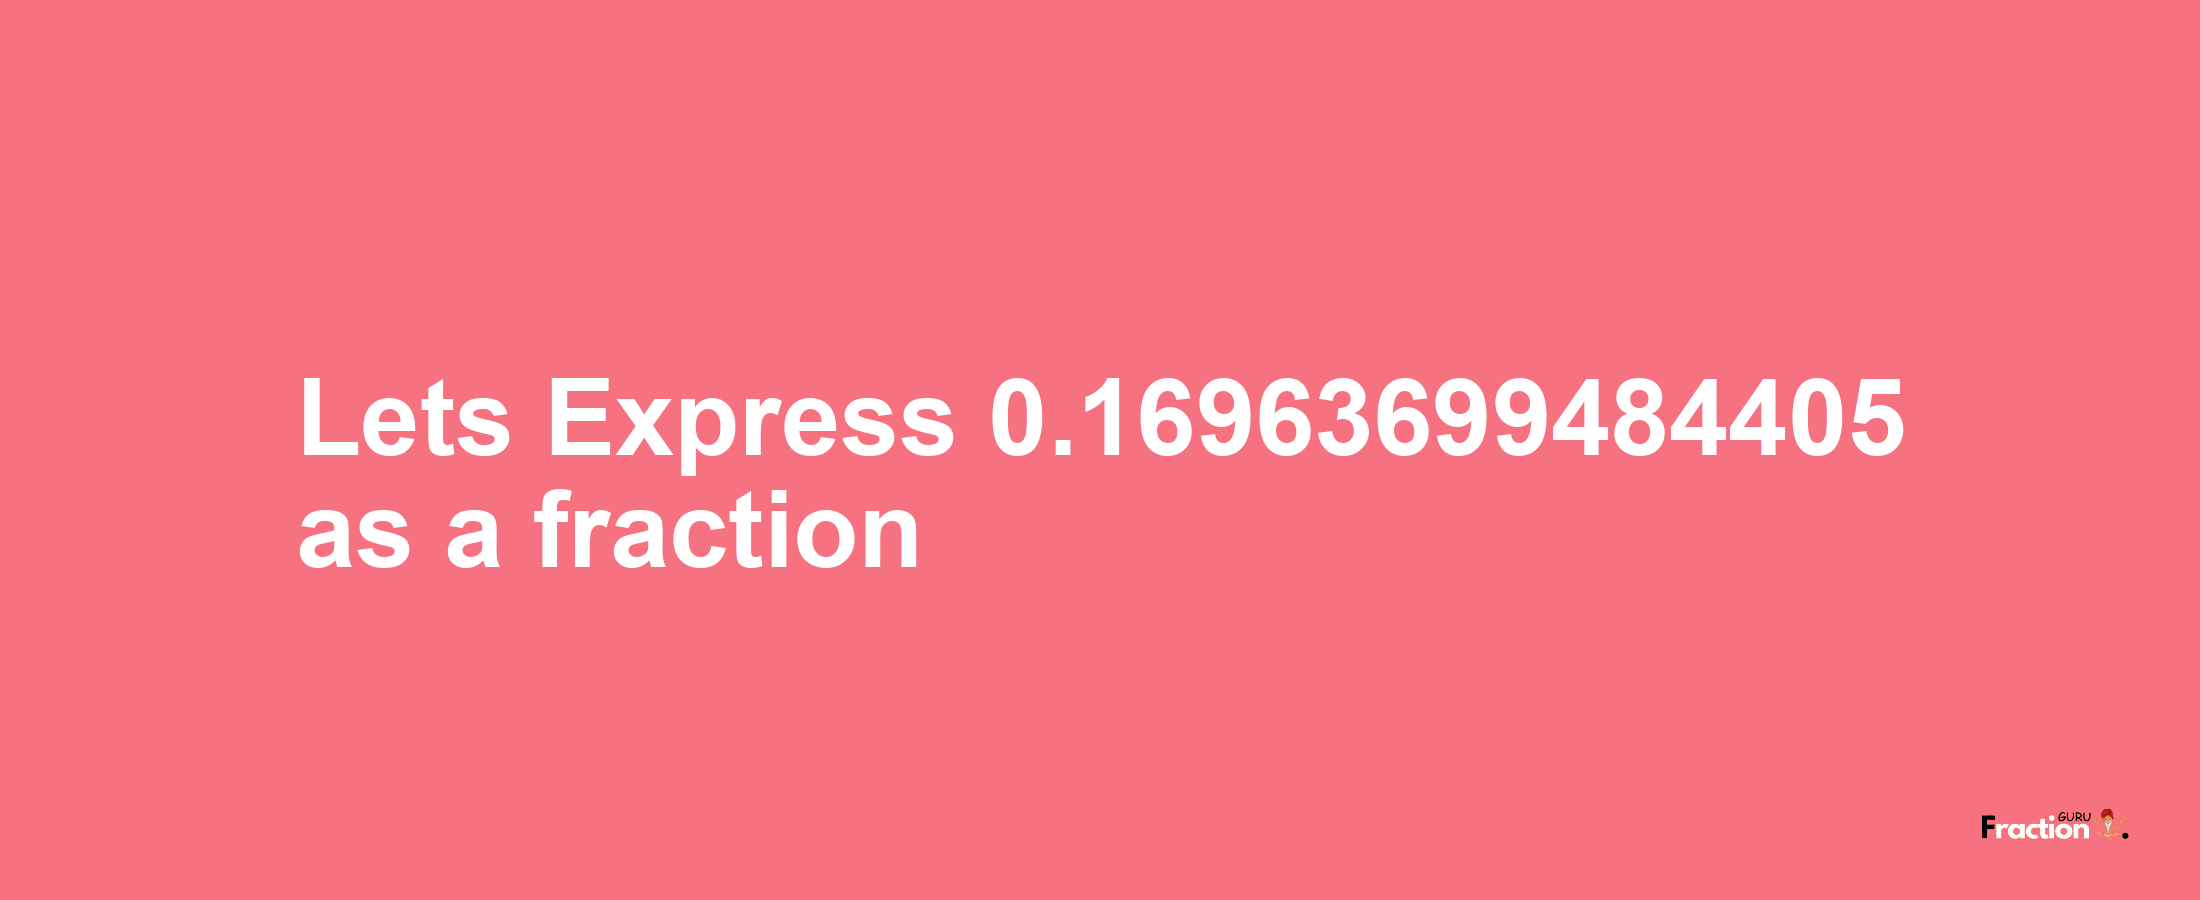 Lets Express 0.16963699484405 as afraction